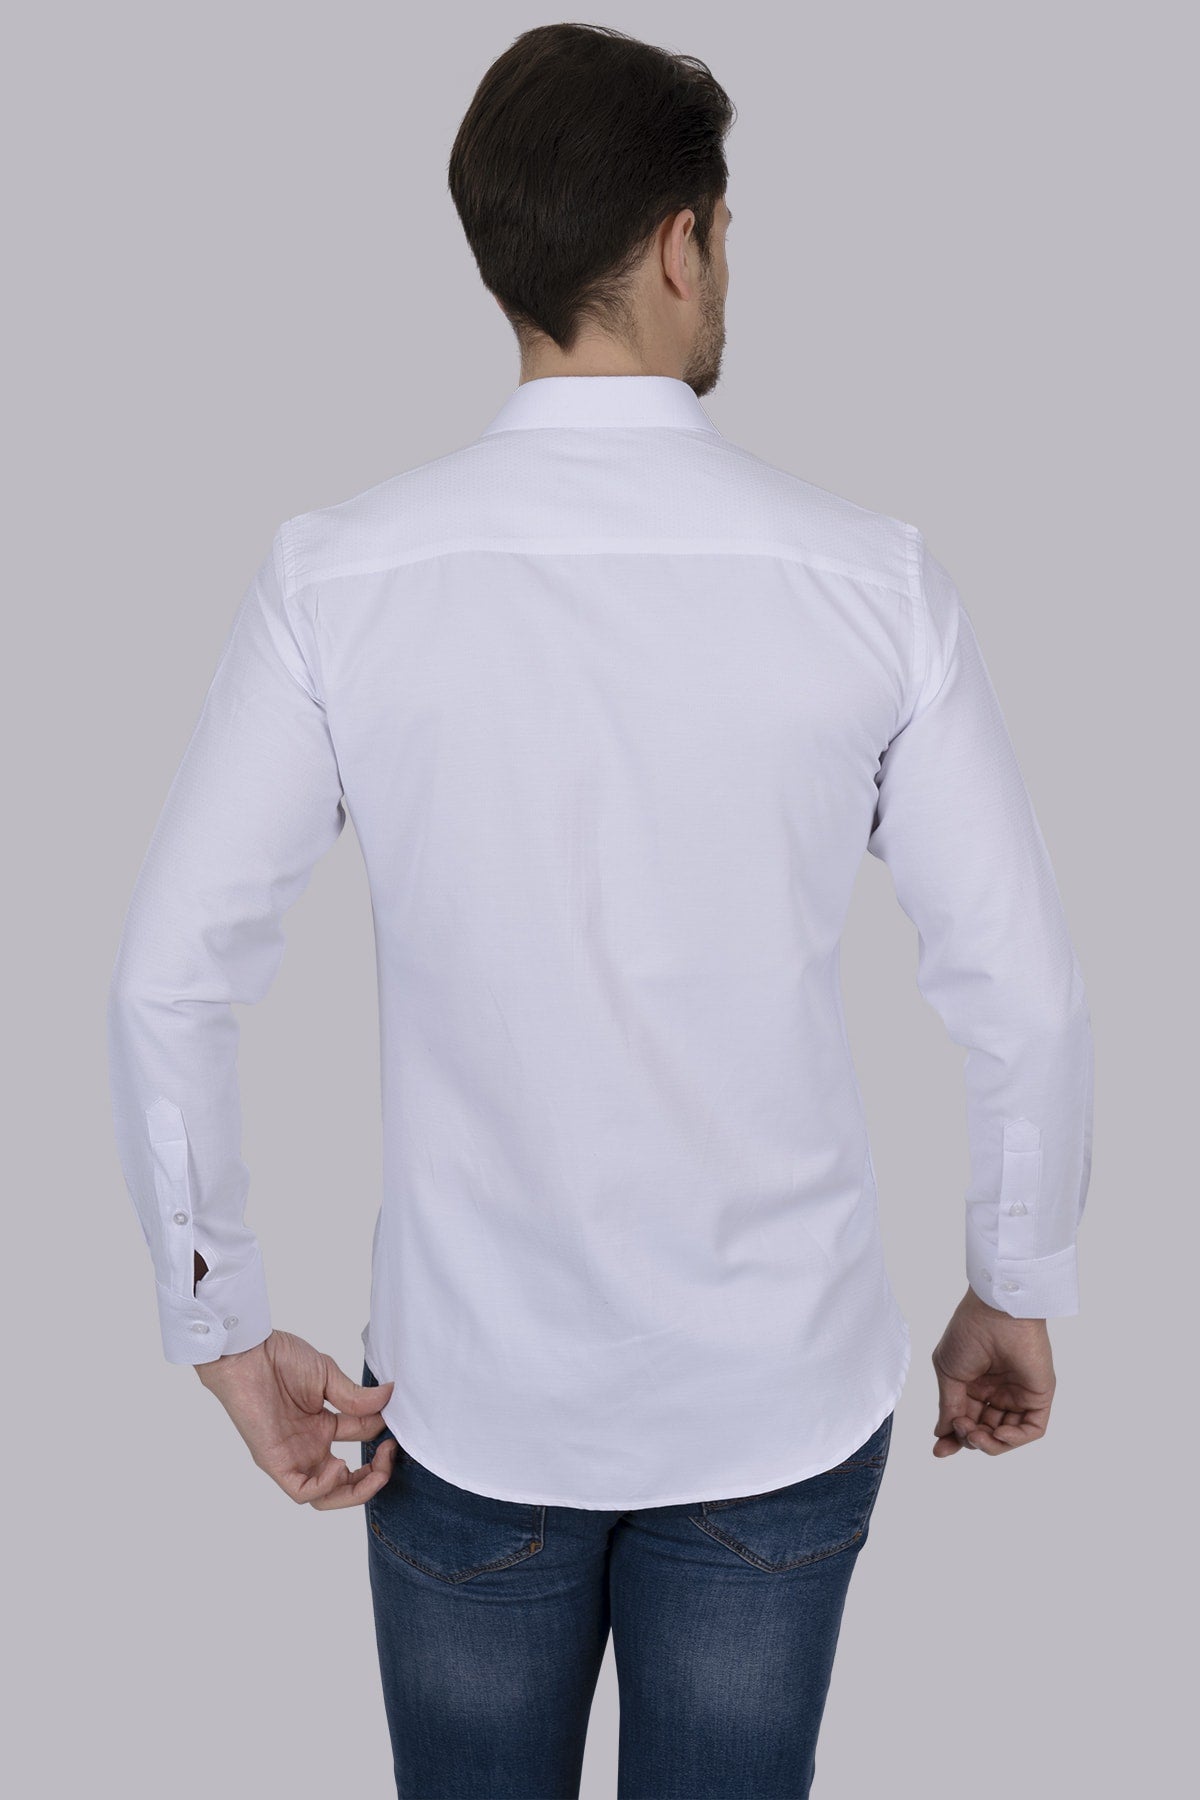 Classic Fit Long Sleeve Business Shirt: Crisp and Confident